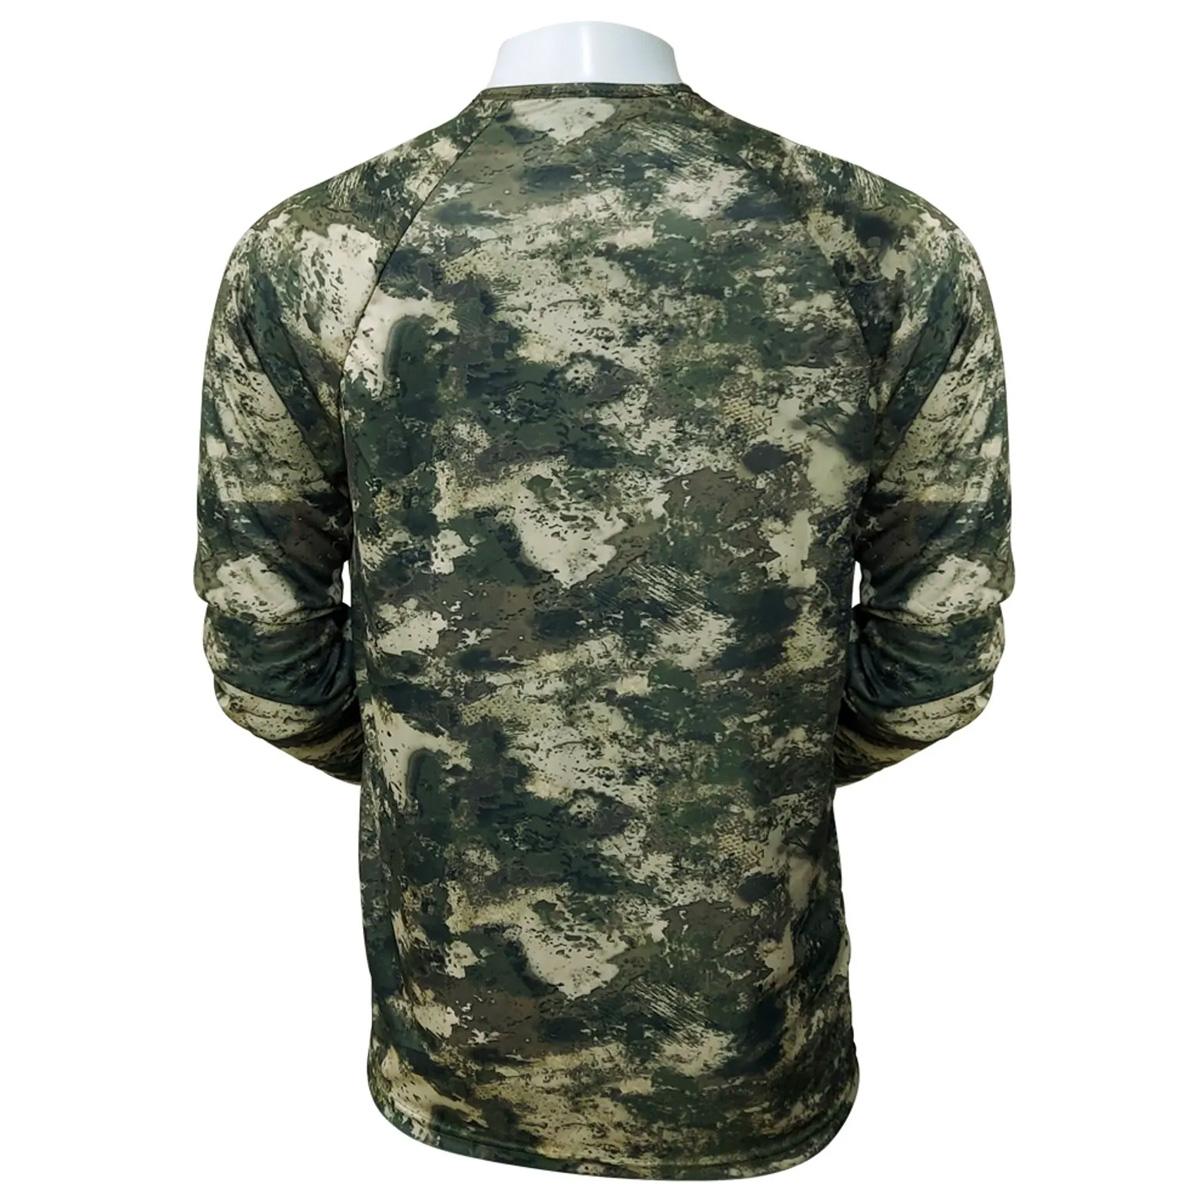 CAMISA MONSTER 3X OUTDOOR - FOREST CAMO